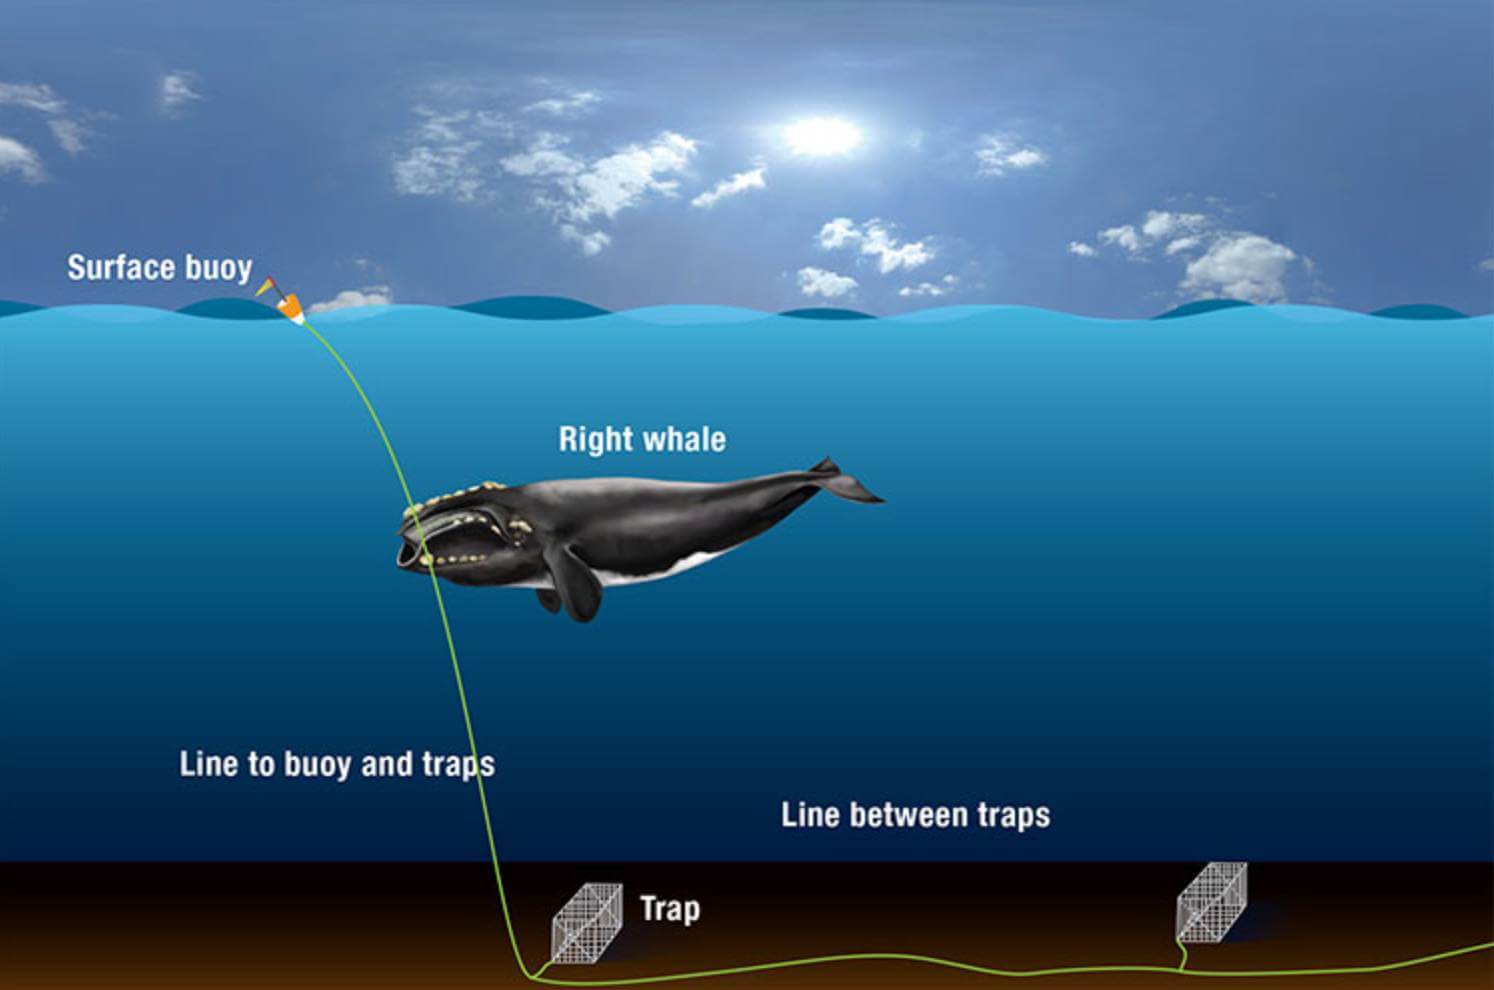 Illustration of how whales get entangled in fishing gear. Image credit: WHOI Graphic Services, Woods Hole Oceanographic Institution